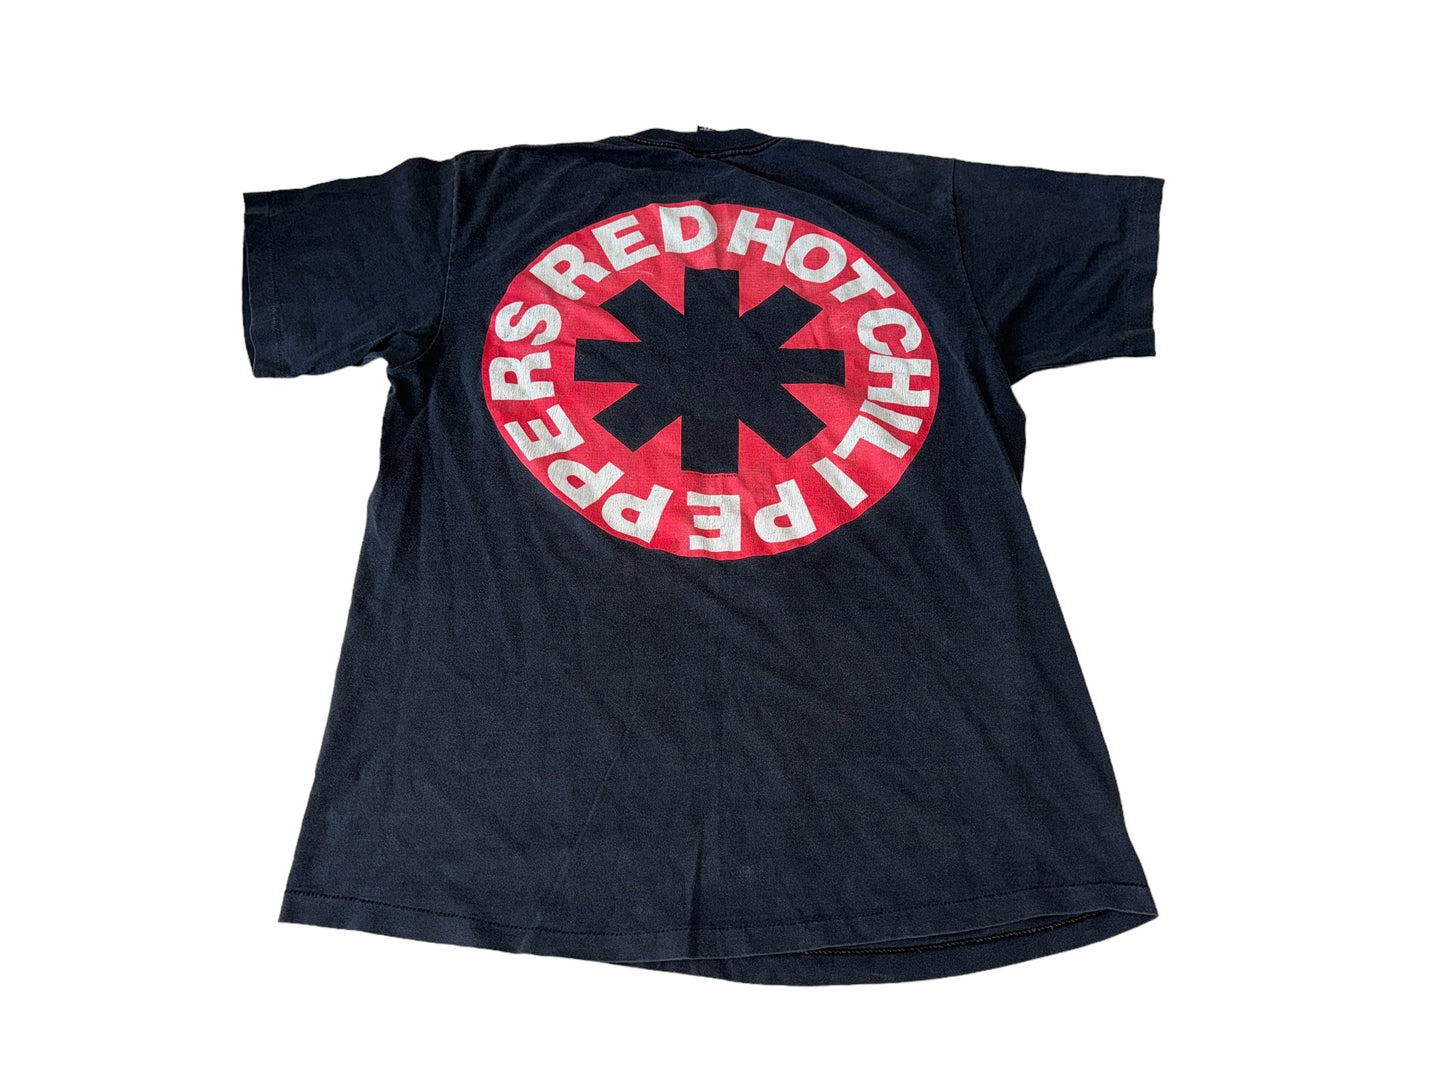 Vintage 1990 Red Hot Chili Peppers T-Shirt